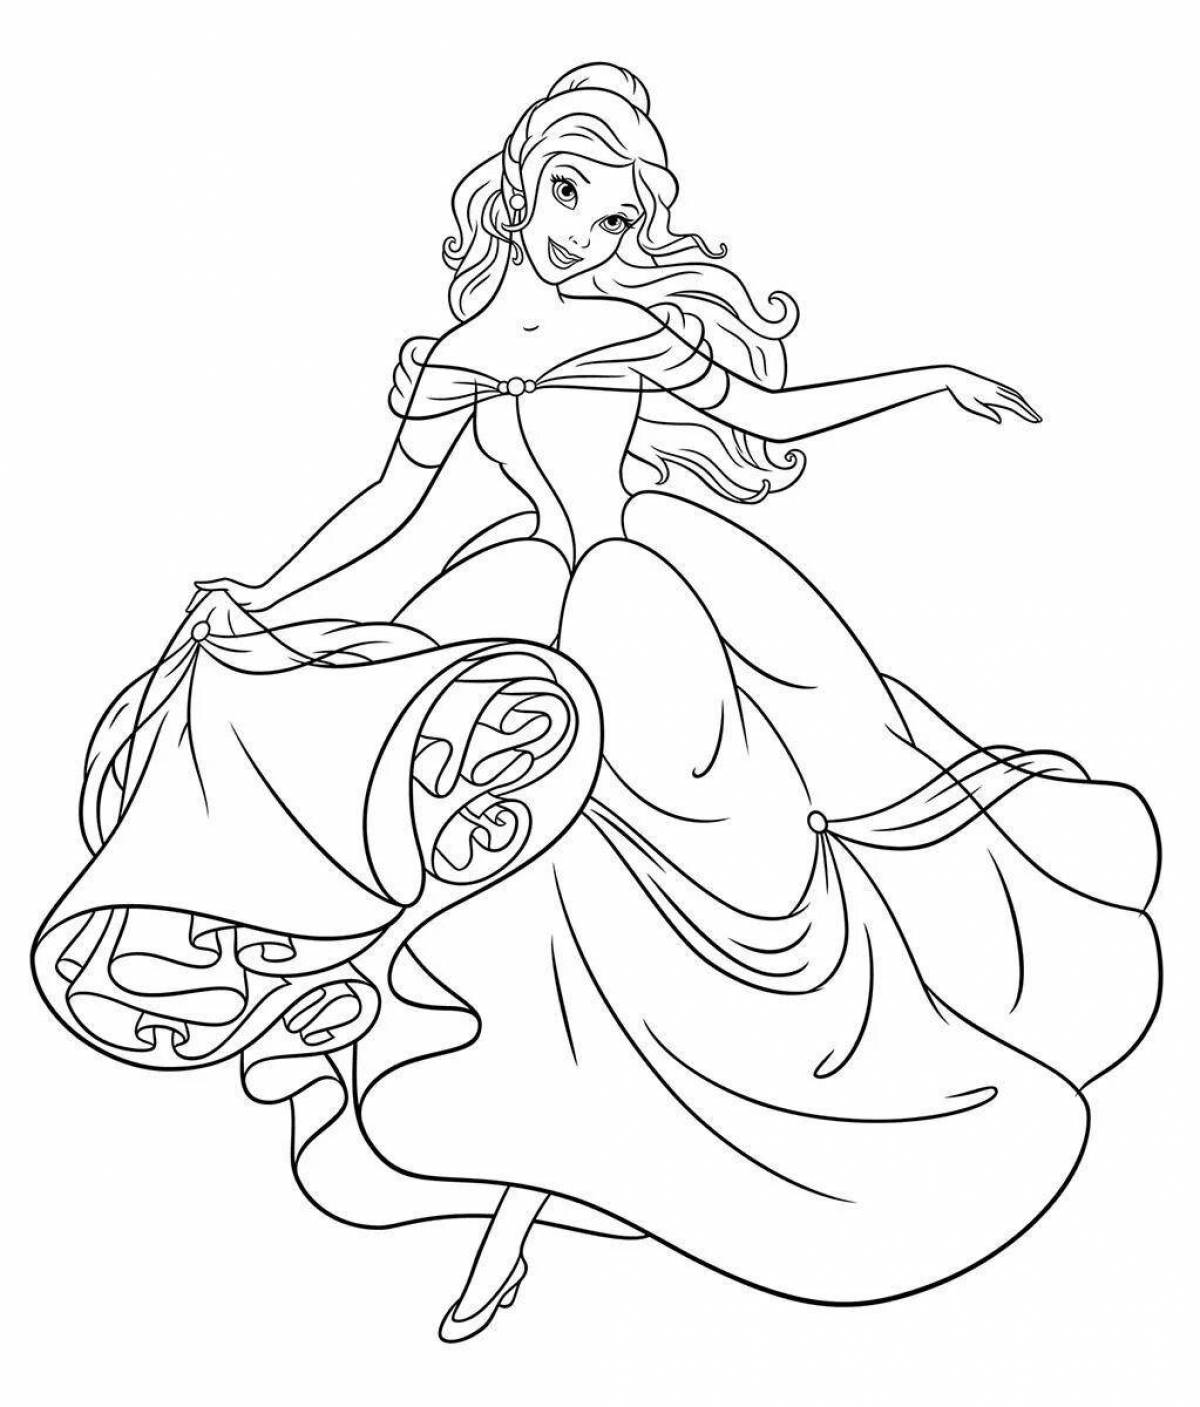 Amazing coloring pages for girls with beautiful princesses